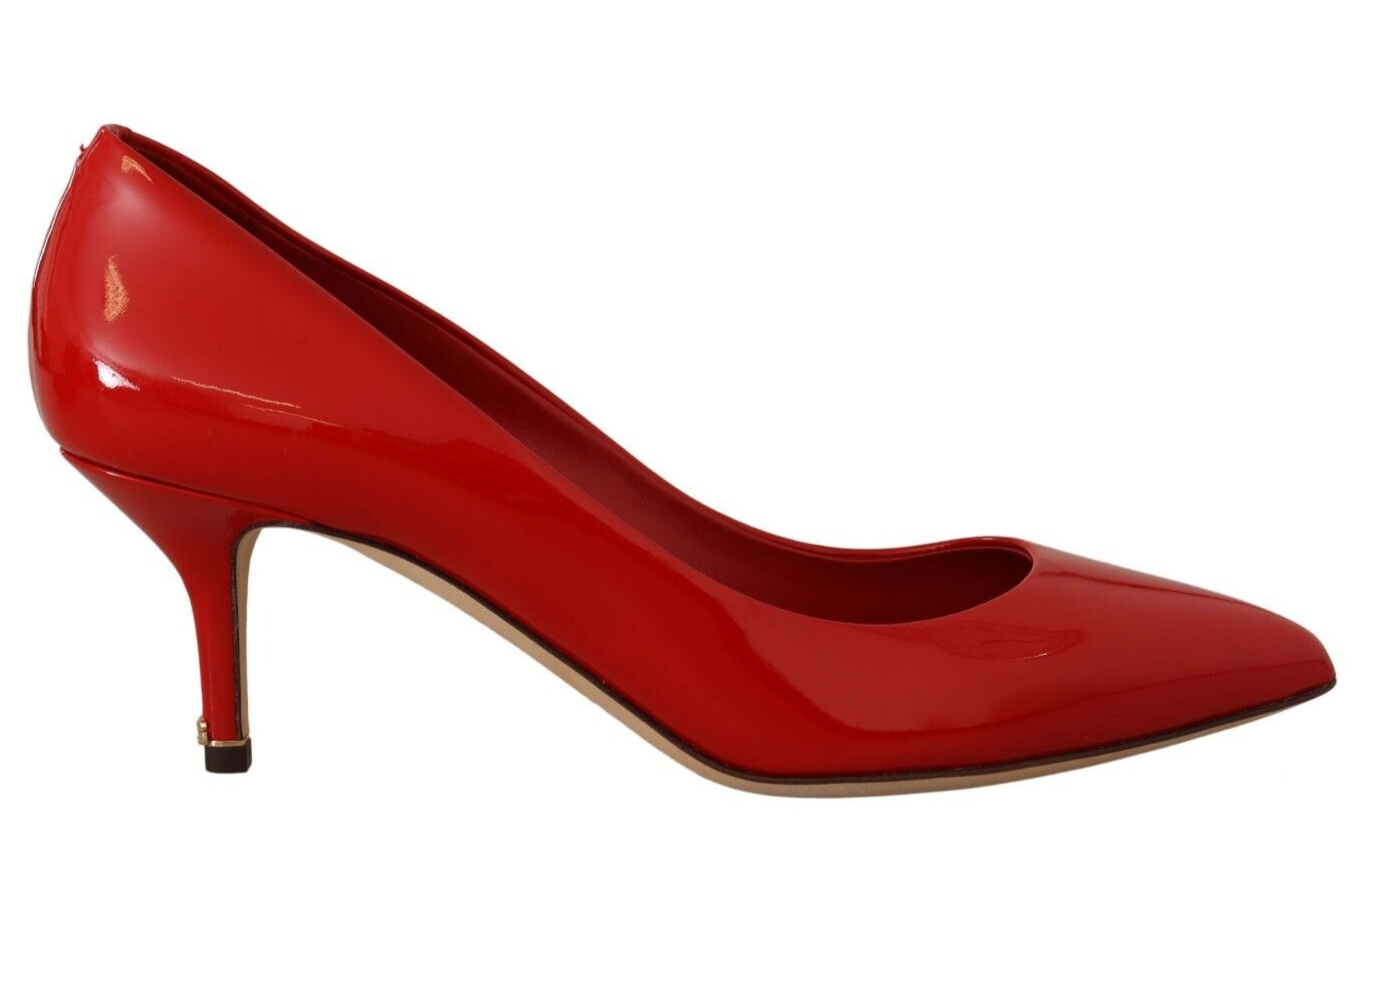 Red Kitten Heels Pumps Patent Leather Shoes